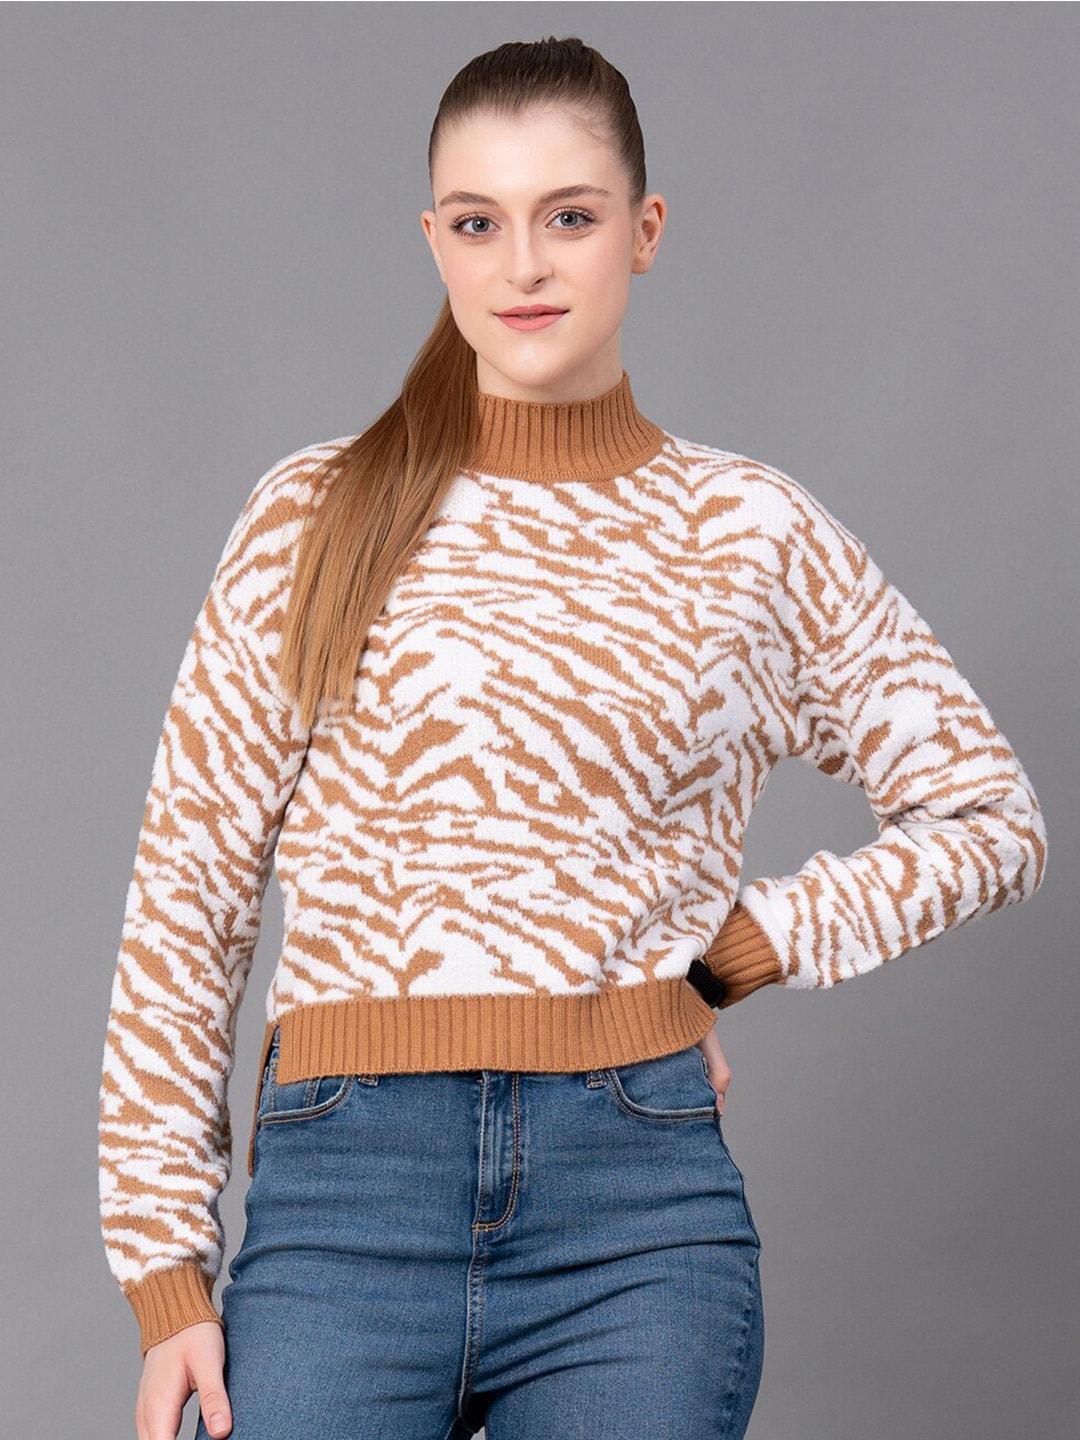 Red Tape Animal Printed High Neck Pullover